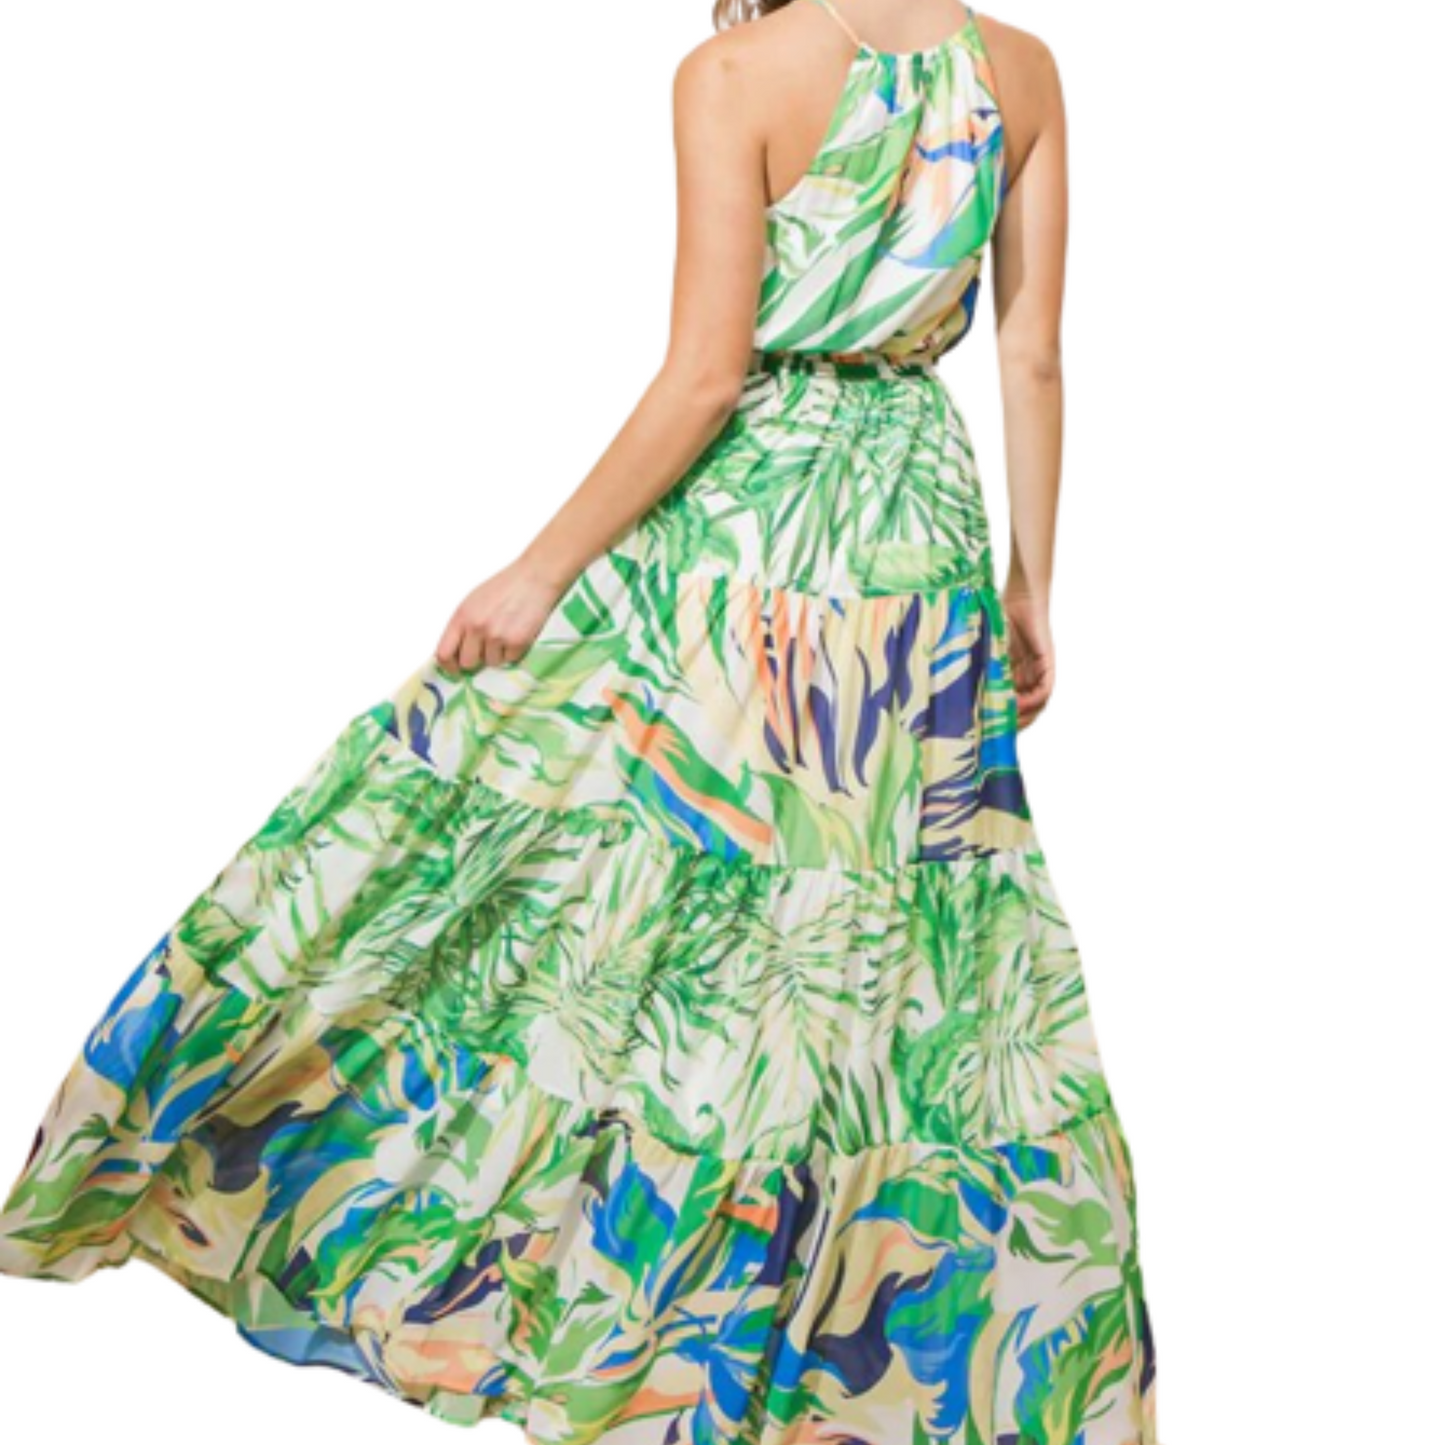 Multicolor, tropical print tiered maxi dress with tie, worn by a woman from the back.